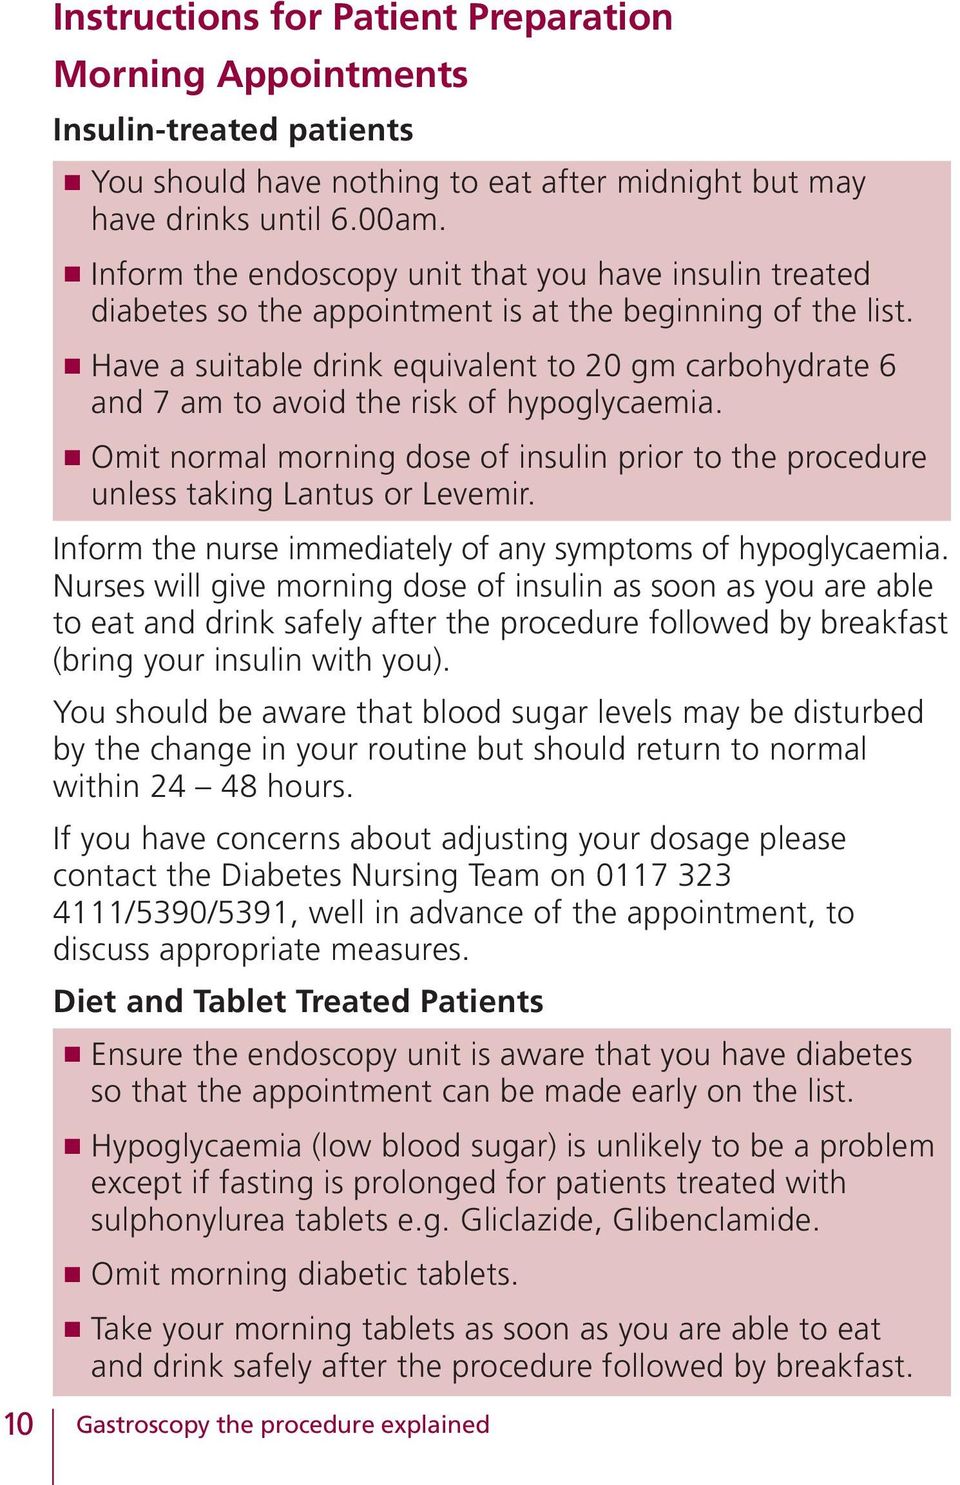 n Have a suitable drink equivalent to 20 gm carbohydrate 6 and 7 am to avoid the risk of hypoglycaemia. n Omit normal morning dose of insulin prior to the procedure unless taking Lantus or Levemir.